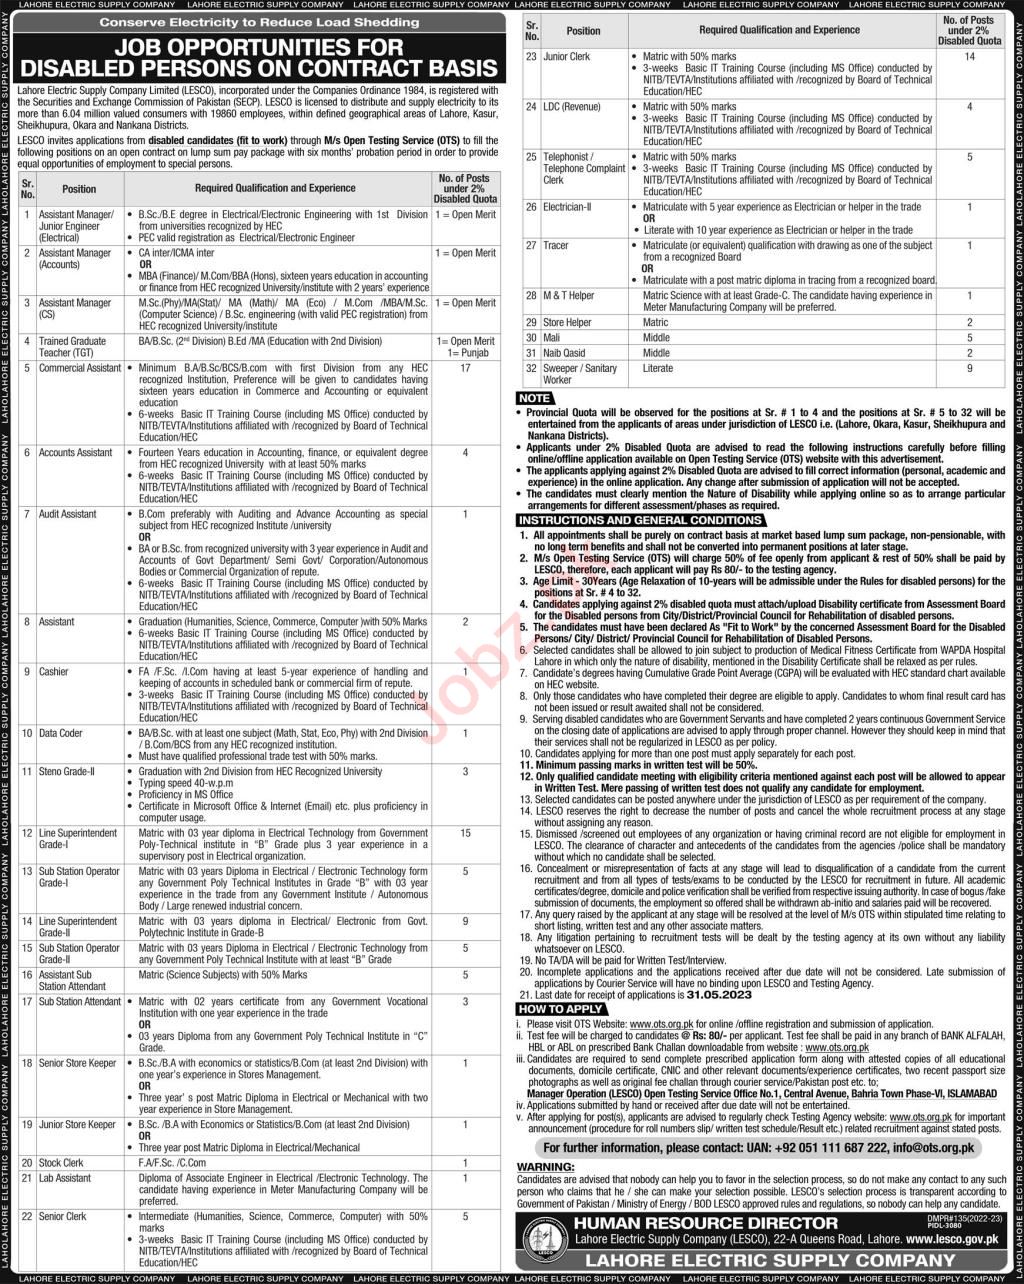 Jobs in Lahore Electric Supply Company LESCO